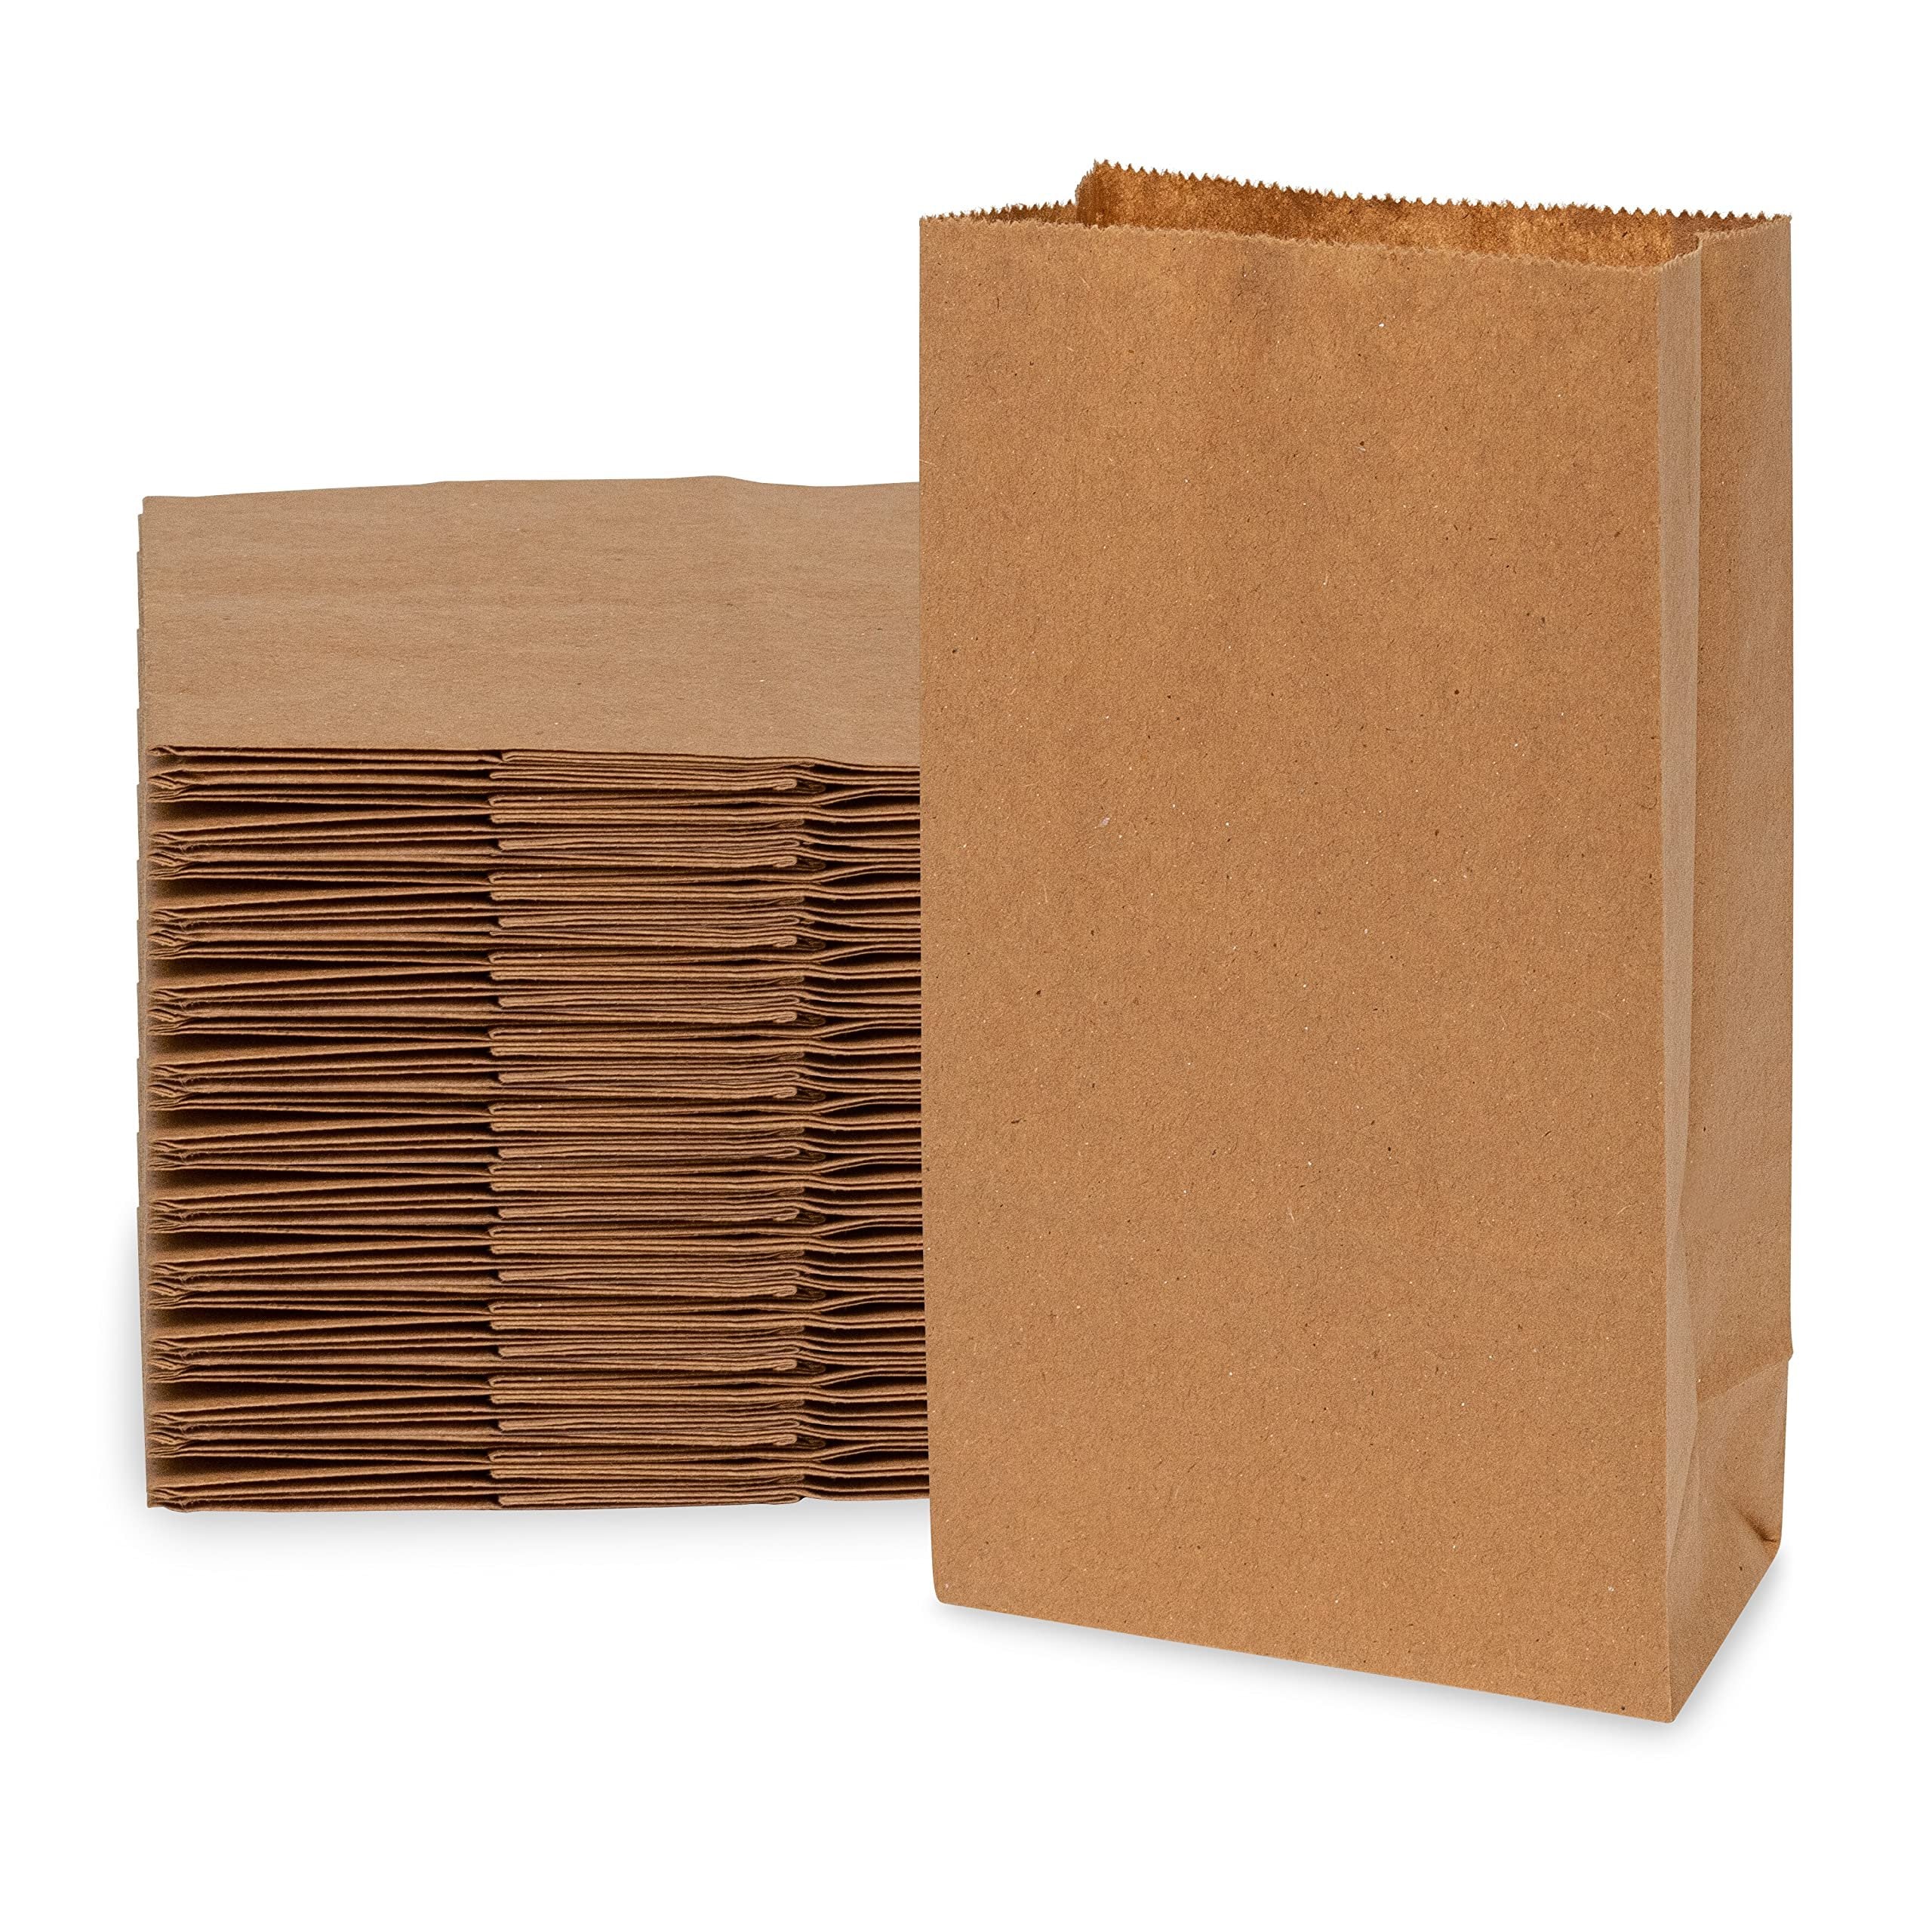 Brown Lunch Bags - 2 LB Extra Small 100 Count Mini Treat & Snack Bag, Brown Paper Bags Disposable Kraft SOS Sack for Popcorn, Bread Bags, Sandwich Bags, Deli, Bakery, Boutique Use, in Bulk - 4x2.5x8